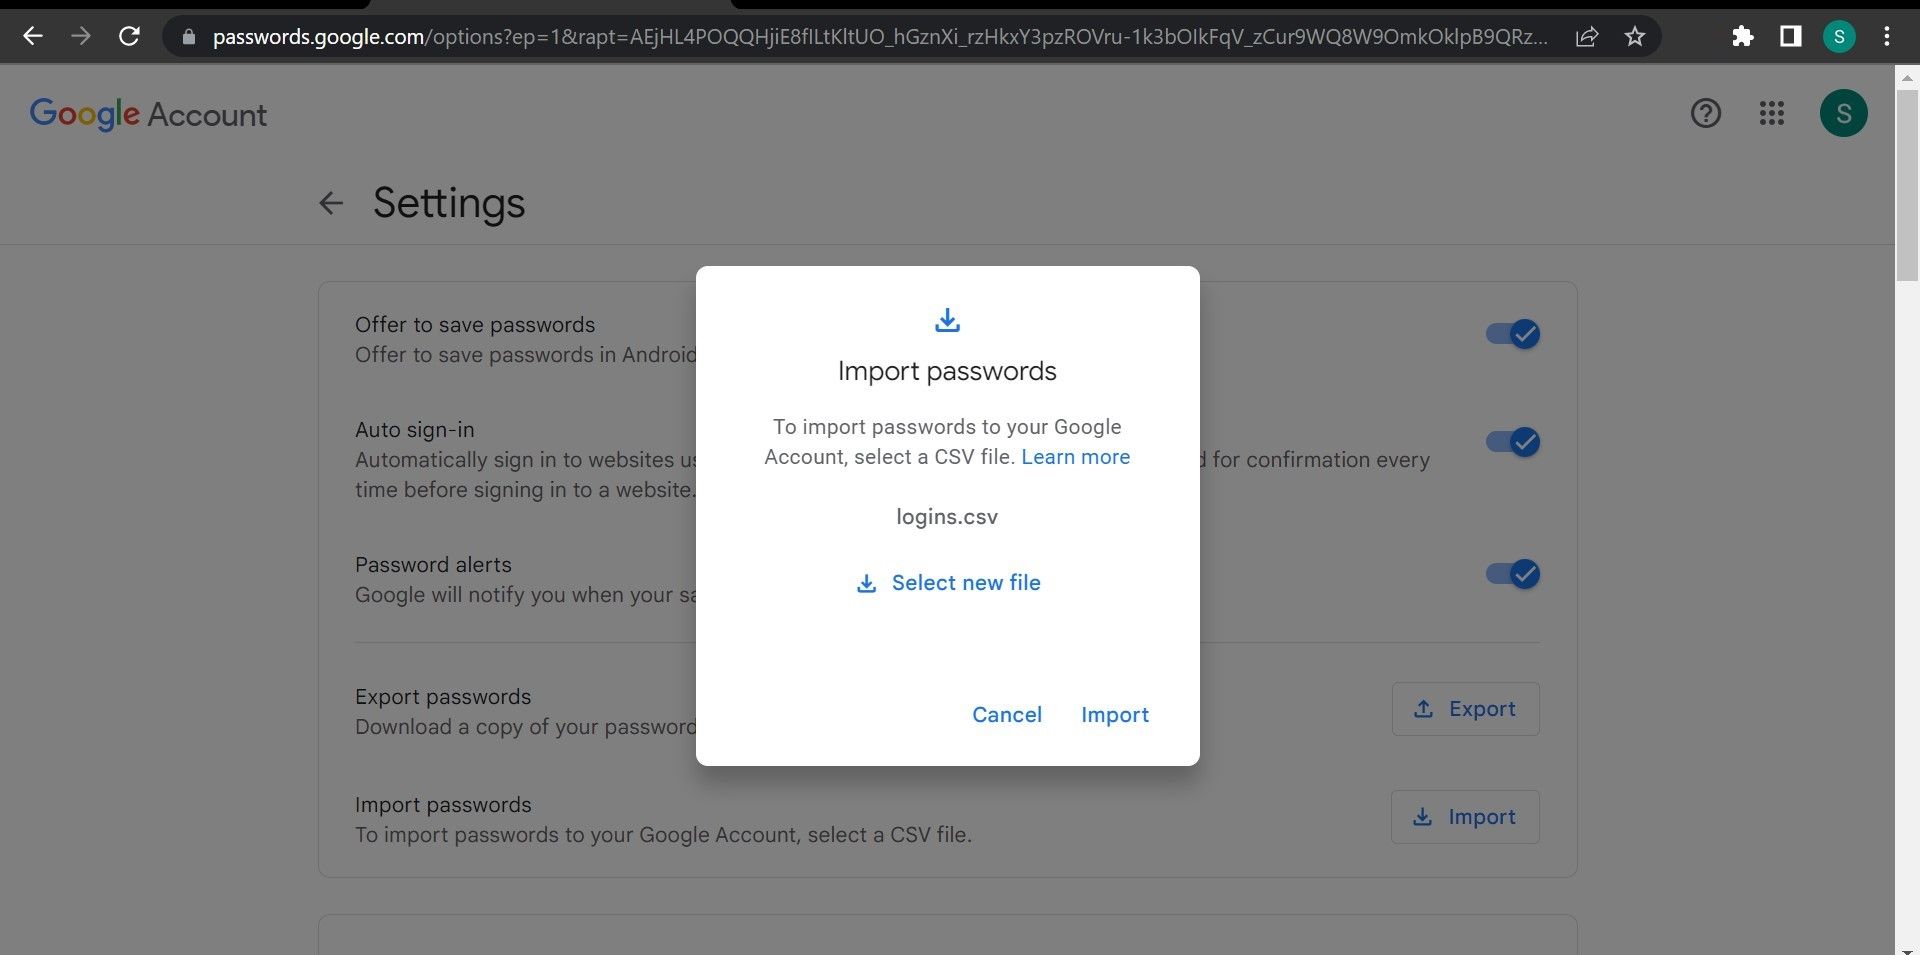 Click the Import button after uploading the CSV file from the device to import passwords into Chrome Password Manager